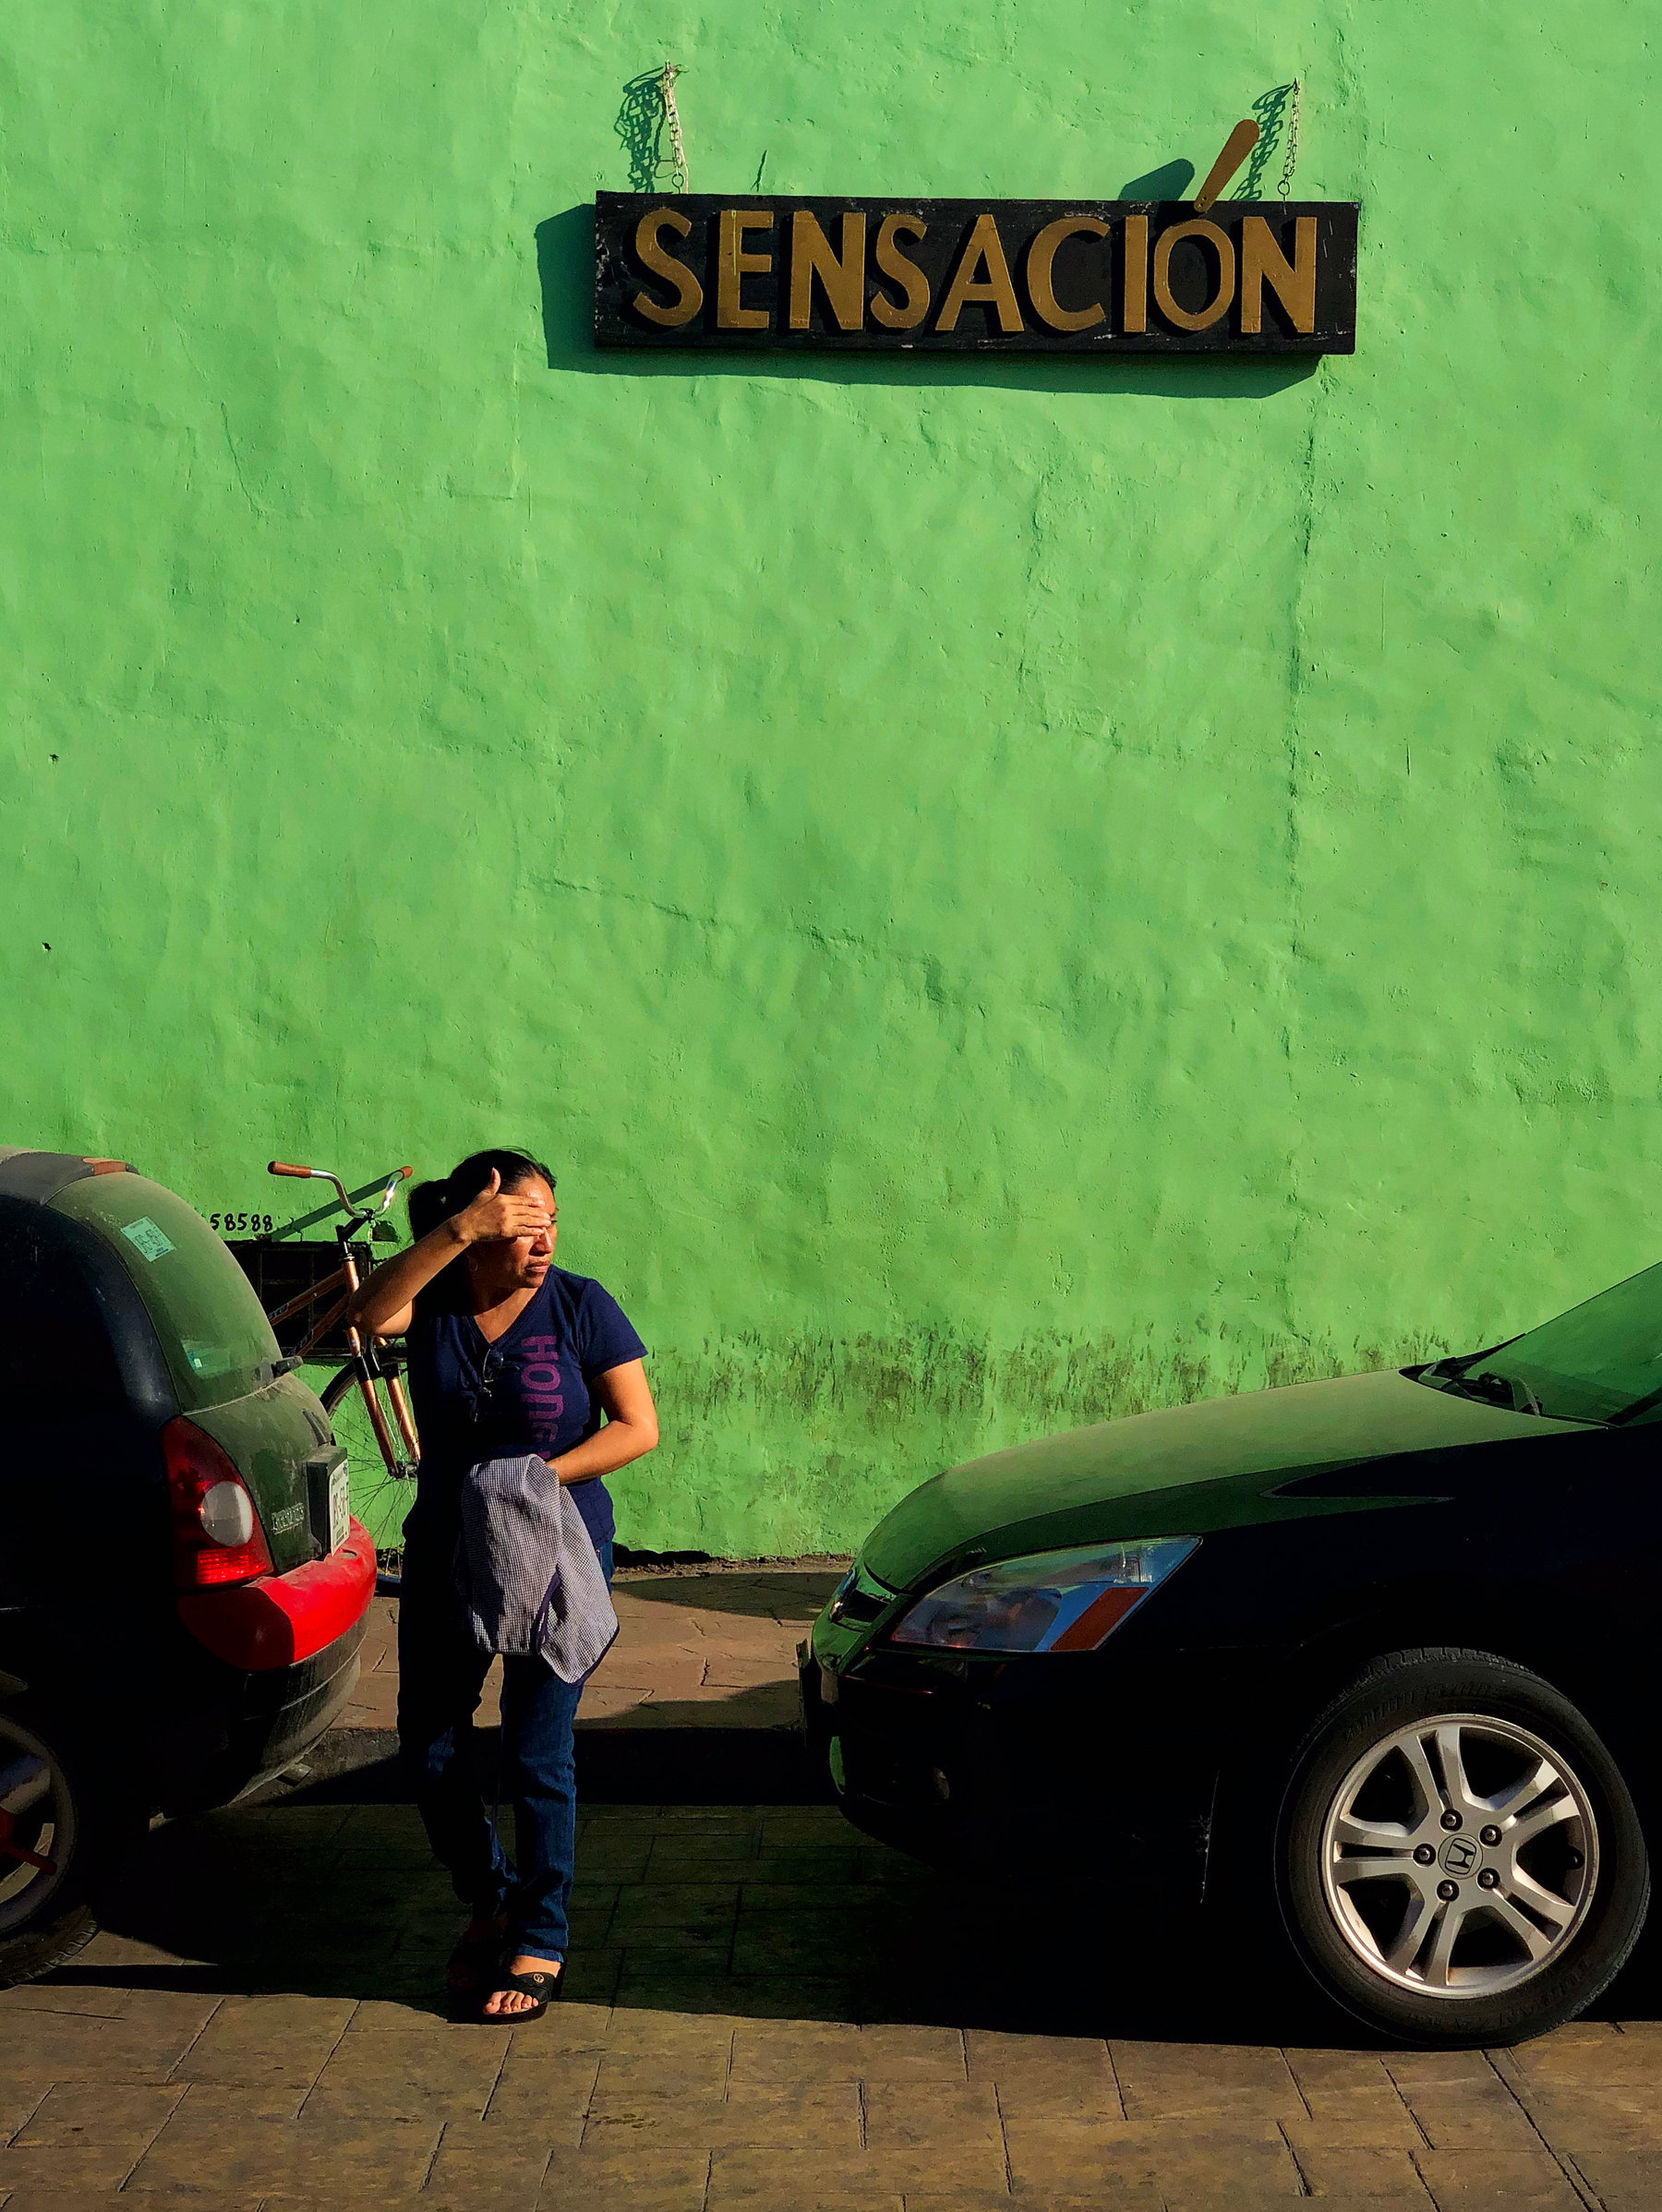 A woman looks out for incoming traffic before crossing the road. Behind her a green wall with a sign that reads “Sensacion”